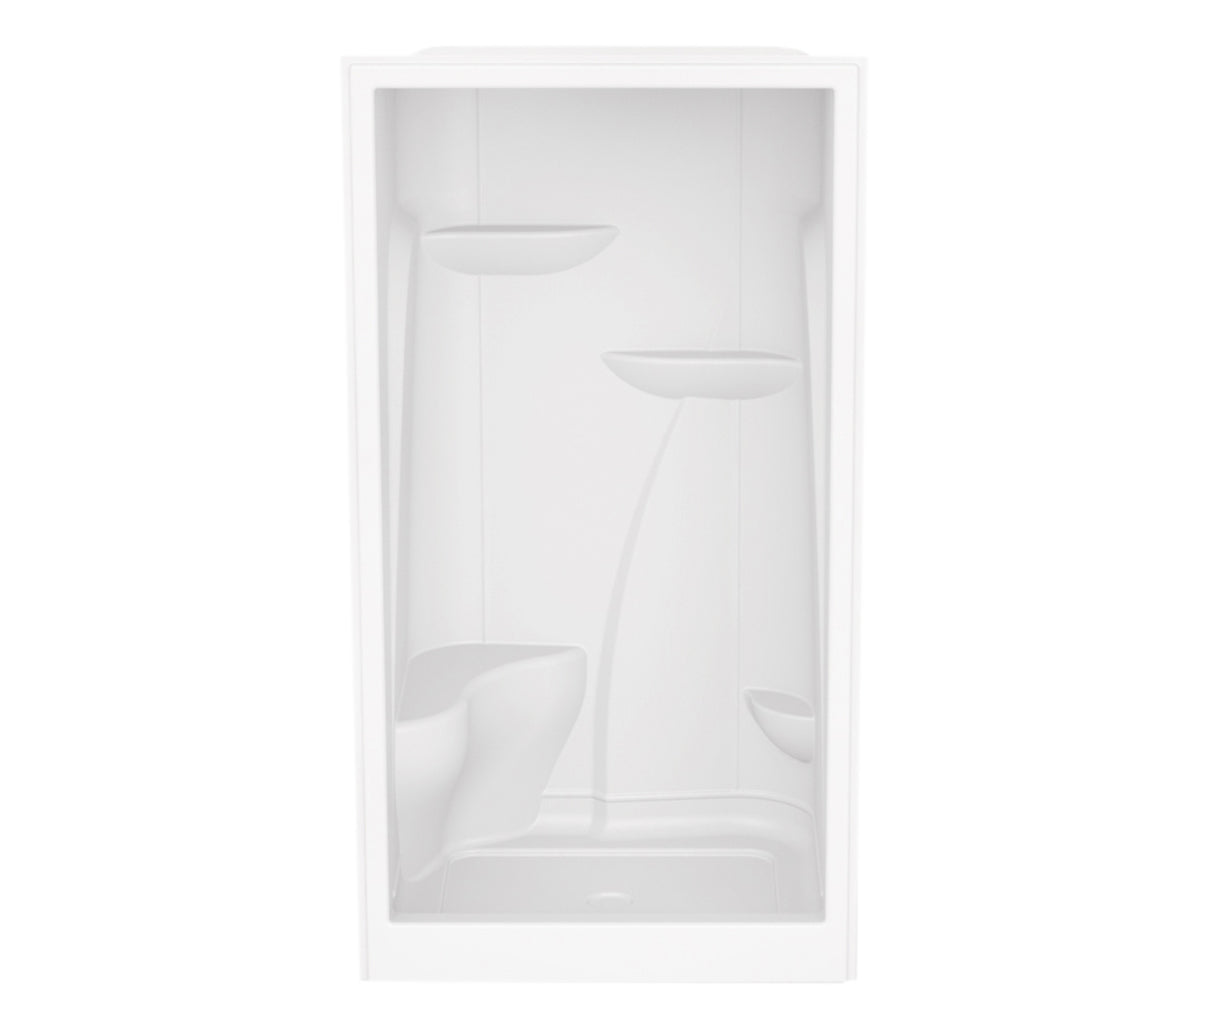 MAAX 103675-000-001-000 M148 48 x 36 Acrylic Alcove Center Drain One-Piece Shower in White